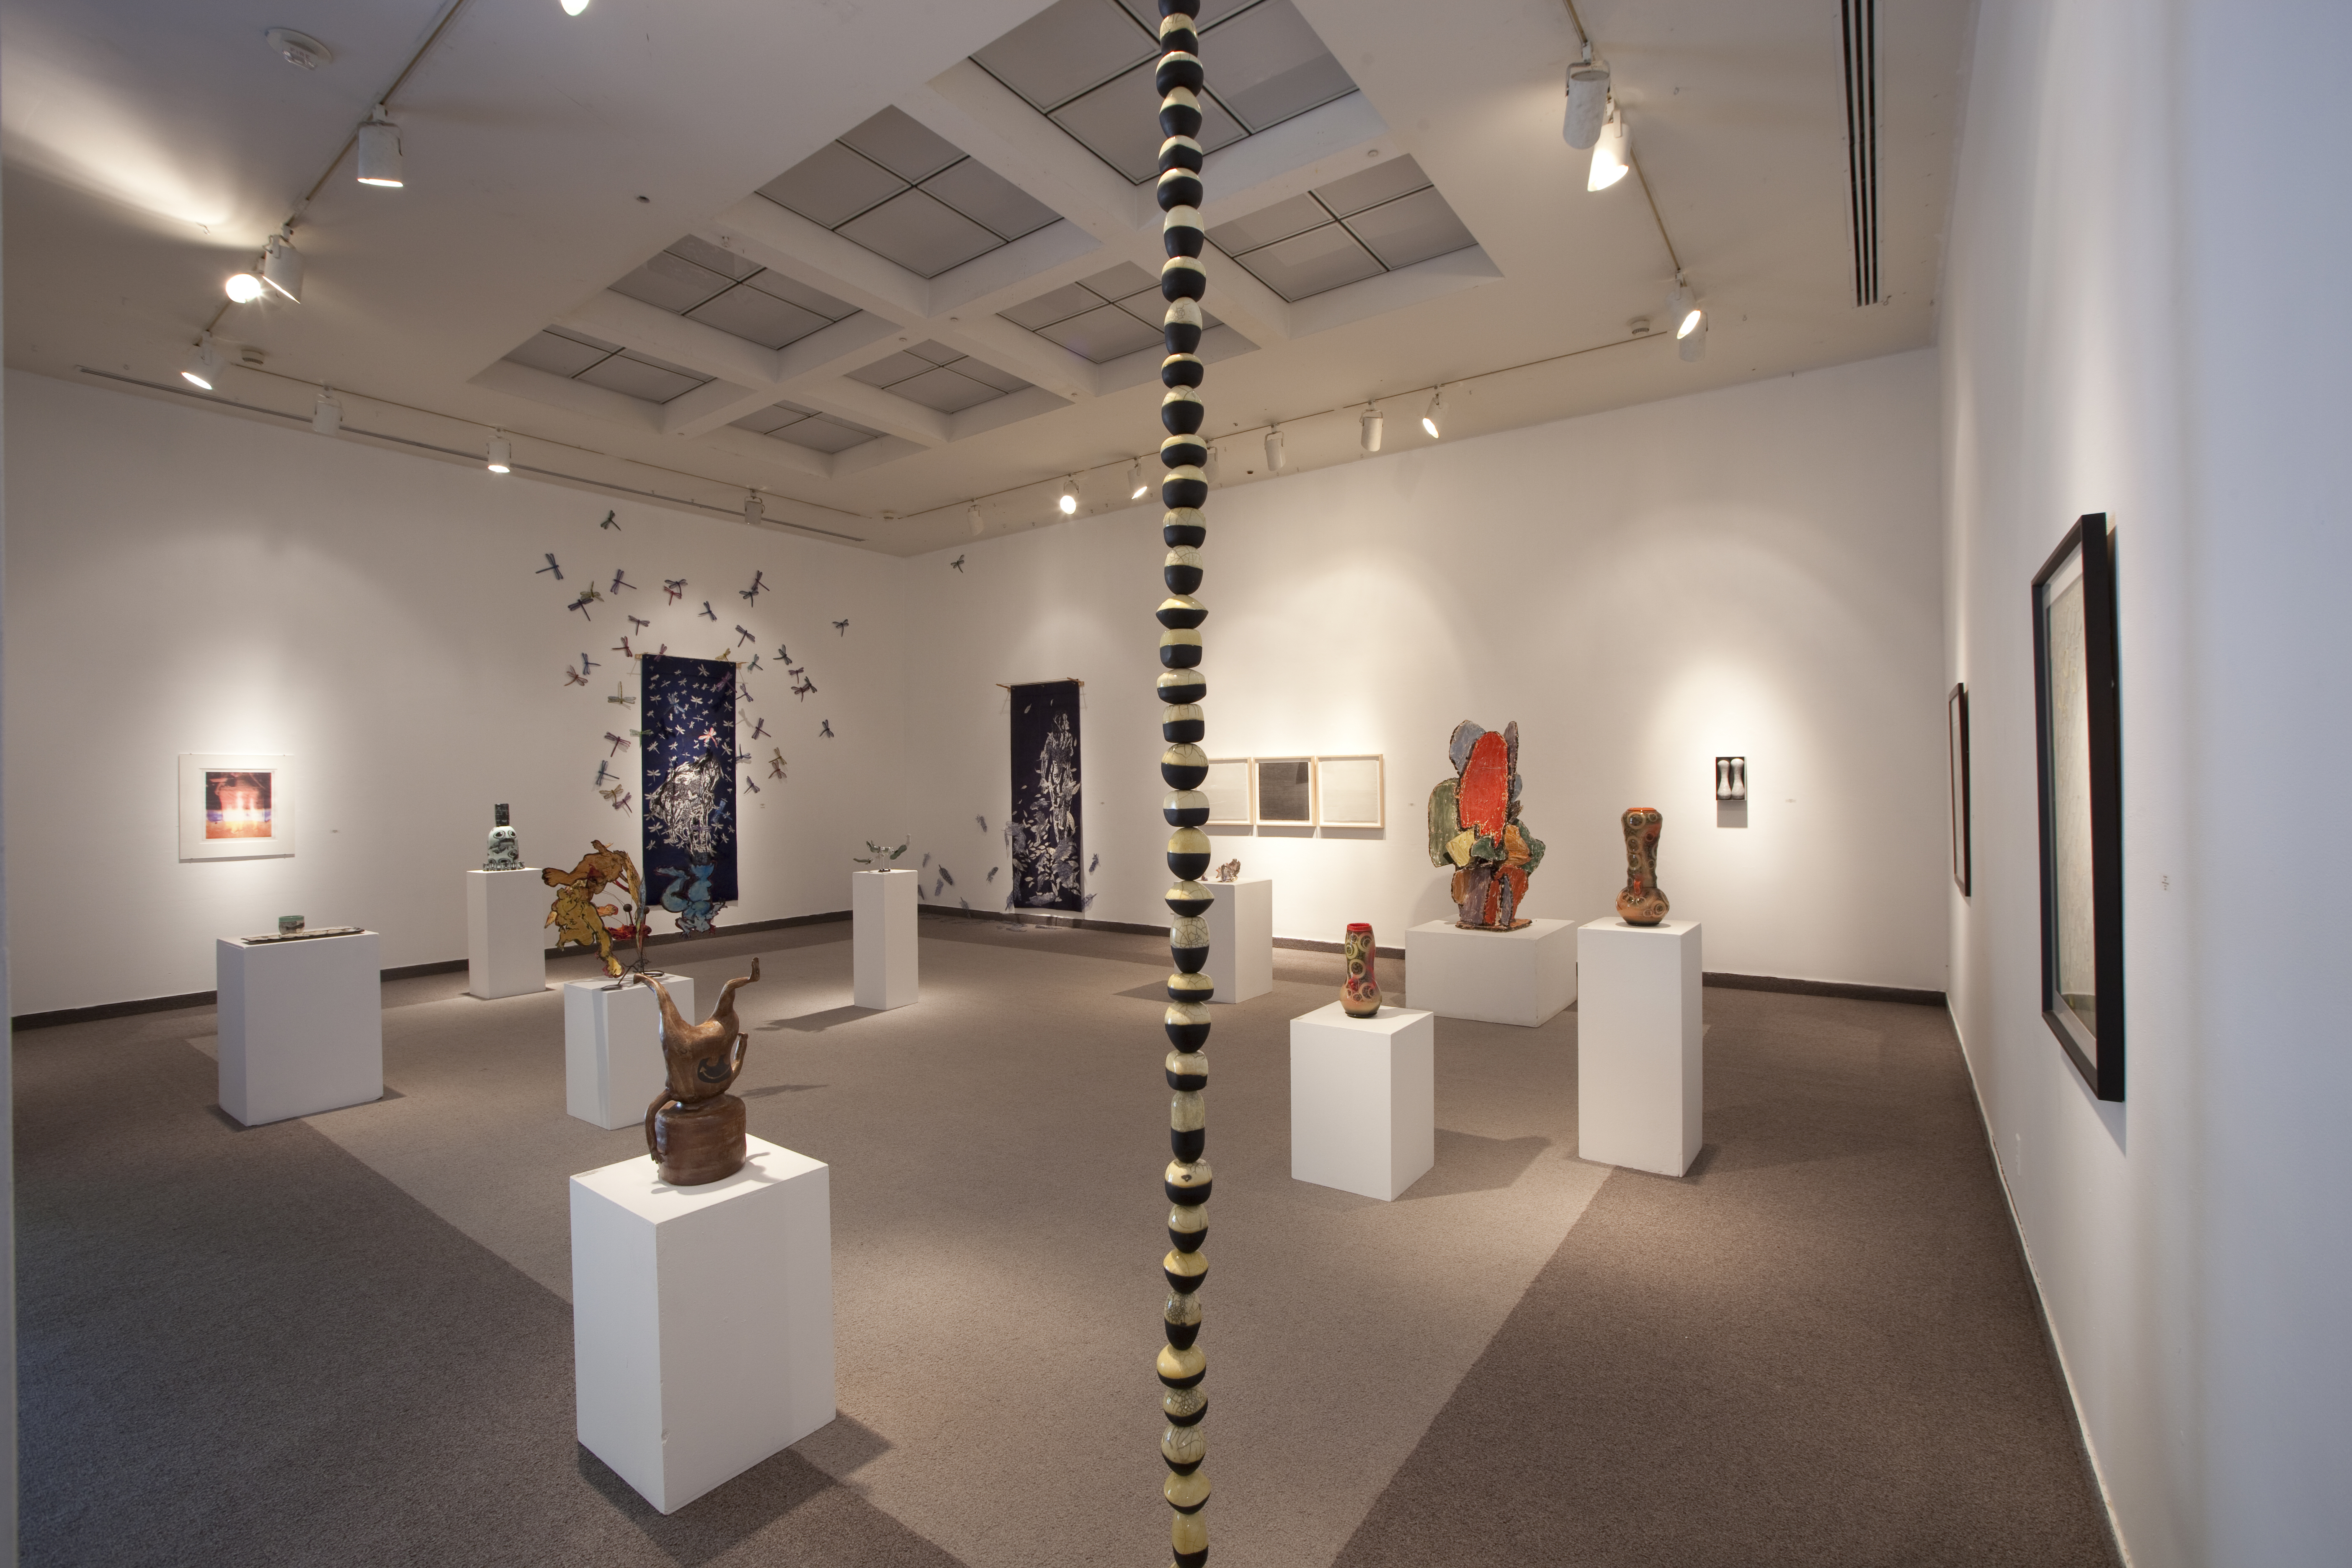 Installation View, Front East Gallery, Ink & Clay 38  Exhibition, Mar. 15, 2012 to Apr. 27, 2012.